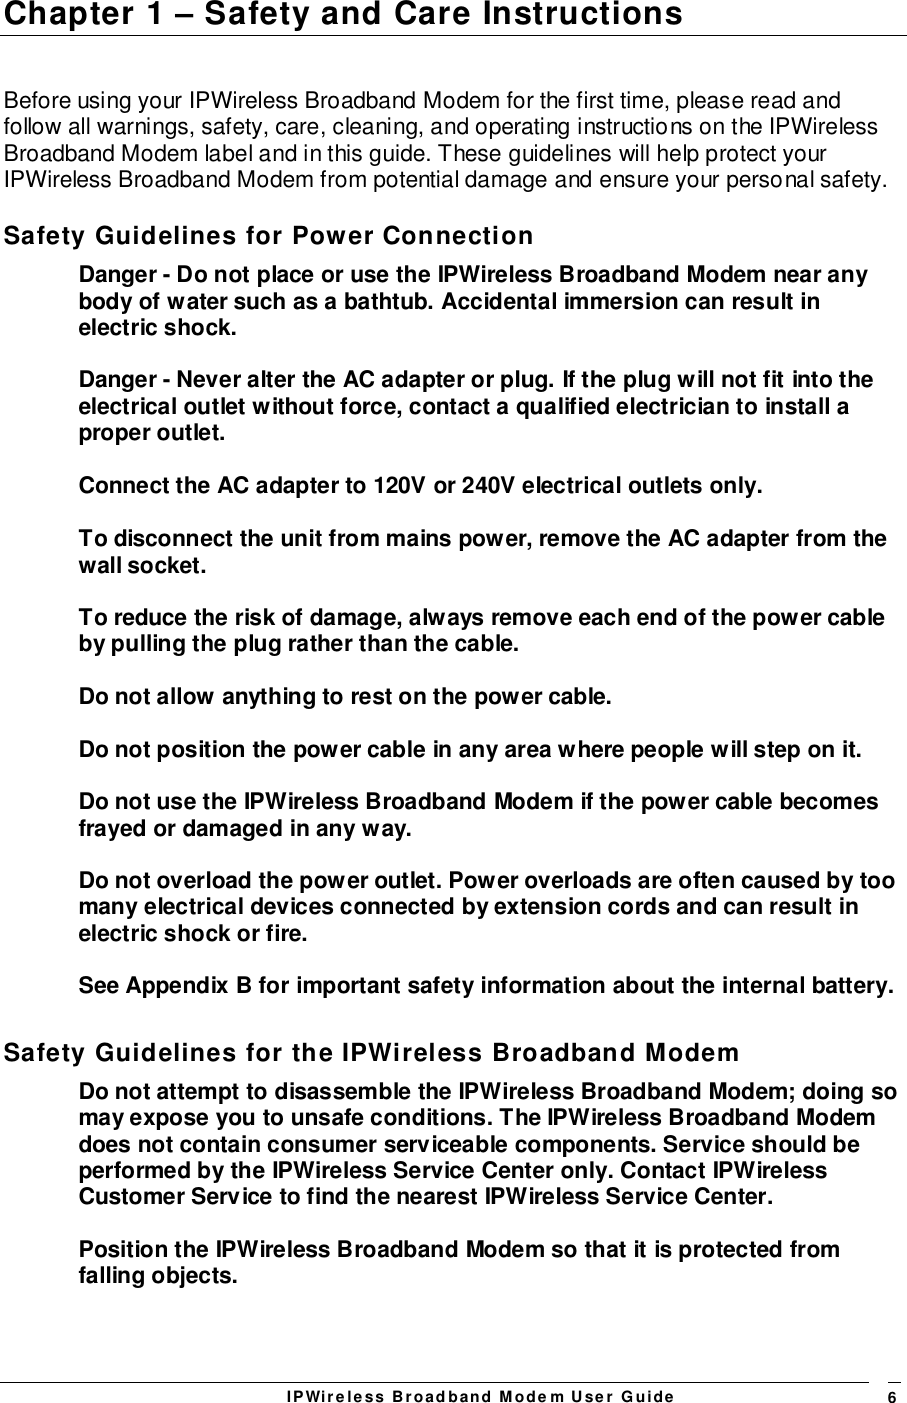 IPWireless Broadband Modem User Guide 6Chapter 1 – Safety and Care InstructionsBefore using your IPWireless Broadband Modem for the first time, please read andfollow all warnings, safety, care, cleaning, and operating instructions on the IPWirelessBroadband Modem label and in this guide. These guidelines will help protect yourIPWireless Broadband Modem from potential damage and ensure your personal safety.Safety Guidelines for Power ConnectionDanger - Do not place or use the IPWireless Broadband Modem near anybody of water such as a bathtub. Accidental immersion can result inelectric shock.Danger - Never alter the AC adapter or plug. If the plug will not fit into theelectrical outlet without force, contact a qualified electrician to install aproper outlet.Connect the AC adapter to 120V or 240V electrical outlets only.To disconnect the unit from mains power, remove the AC adapter from thewall socket.To reduce the risk of damage, always remove each end of the power cableby pulling the plug rather than the cable.Do not allow anything to rest on the power cable.Do not position the power cable in any area where people will step on it.Do not use the IPWireless Broadband Modem if the power cable becomesfrayed or damaged in any way.Do not overload the power outlet. Power overloads are often caused by toomany electrical devices connected by extension cords and can result inelectric shock or fire.See Appendix B for important safety information about the internal battery.Safety Guidelines for the IPWireless Broadband ModemDo not attempt to disassemble the IPWireless Broadband Modem; doing somay expose you to unsafe conditions. The IPWireless Broadband Modemdoes not contain consumer serviceable components. Service should beperformed by the IPWireless Service Center only. Contact IPWirelessCustomer Service to find the nearest IPWireless Service Center.Position the IPWireless Broadband Modem so that it is protected fromfalling objects.